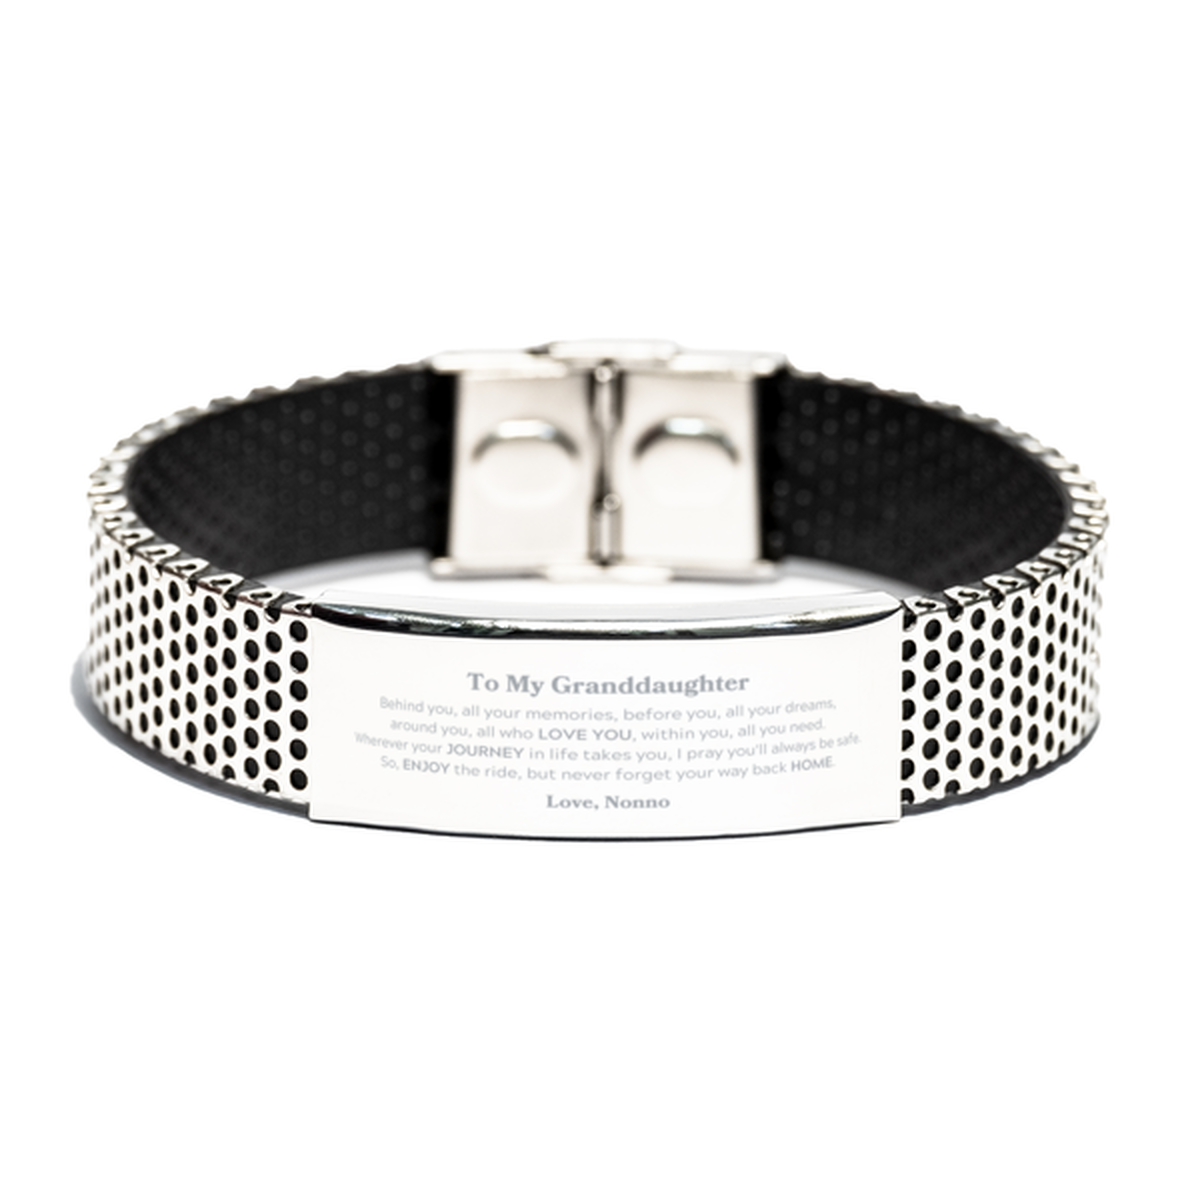 To My Granddaughter Graduation Gifts from Nonno, Granddaughter Stainless Steel Bracelet Christmas Birthday Gifts for Granddaughter Behind you, all your memories, before you, all your dreams. Love, Nonno